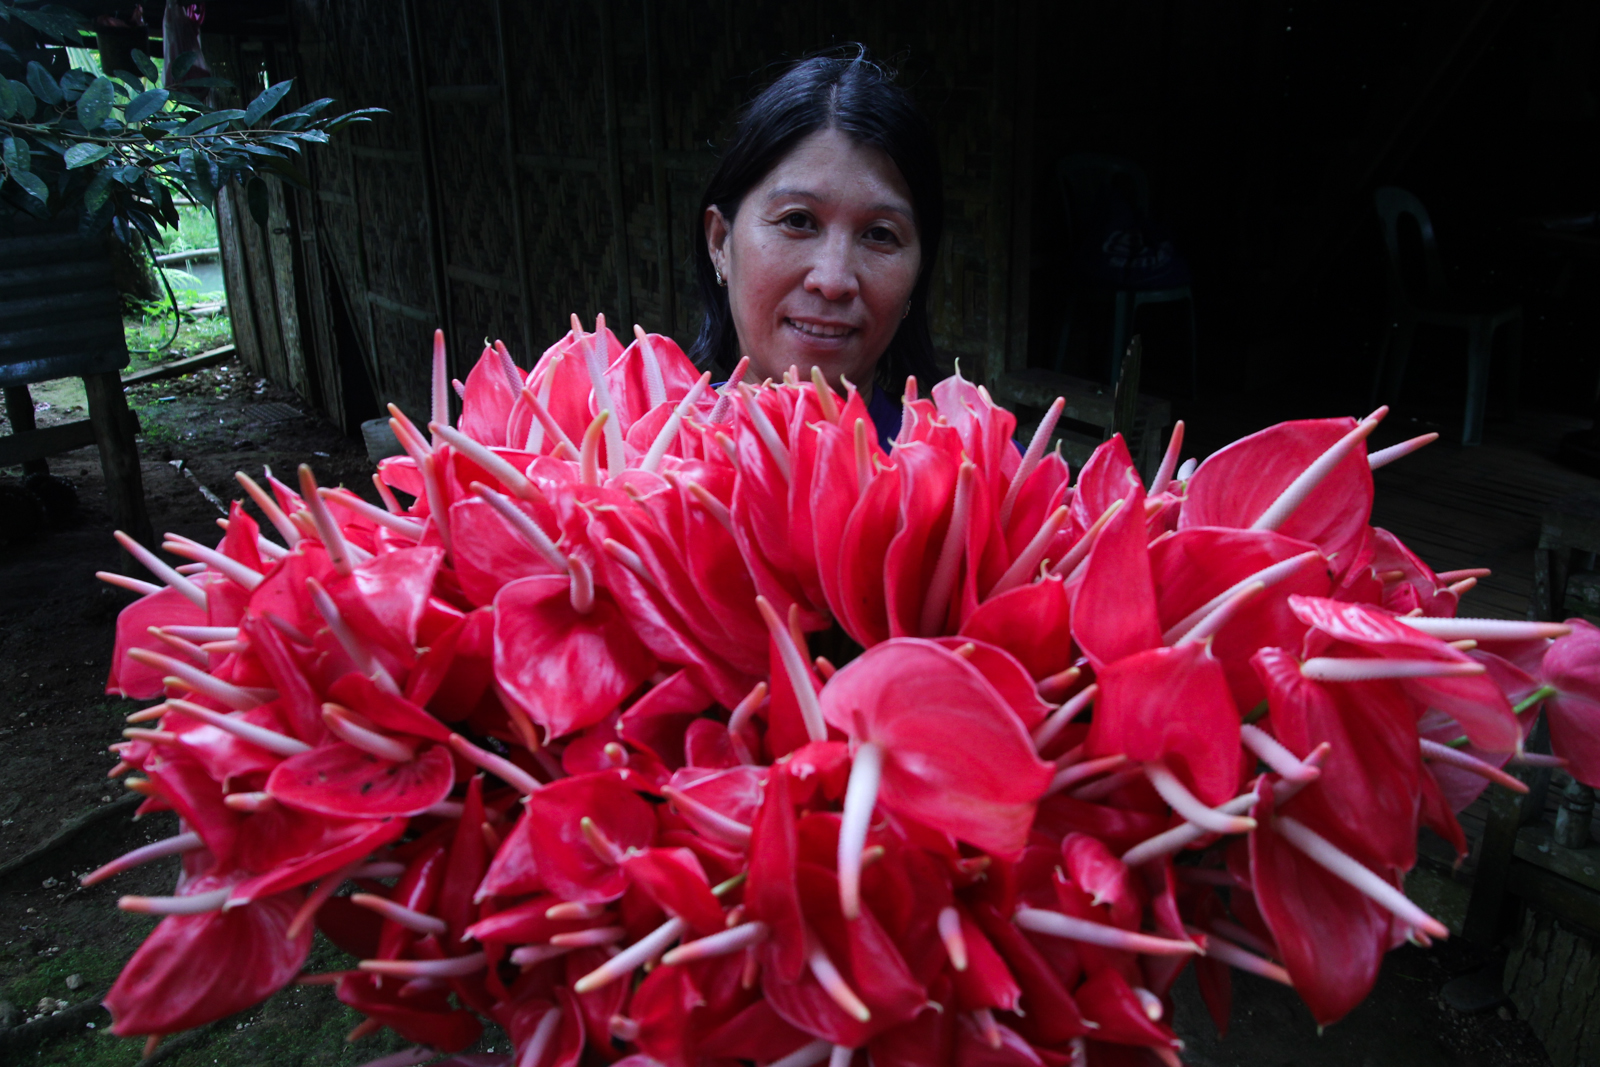 GOOD HARVEST. Evelyn Lim shows her harvest of anthurium flowers which is being sold for 40 pesos per dozen at a buying station in Barangay Batasan, Makilala, North Cotabato in this photo taken on October 28, 2015.